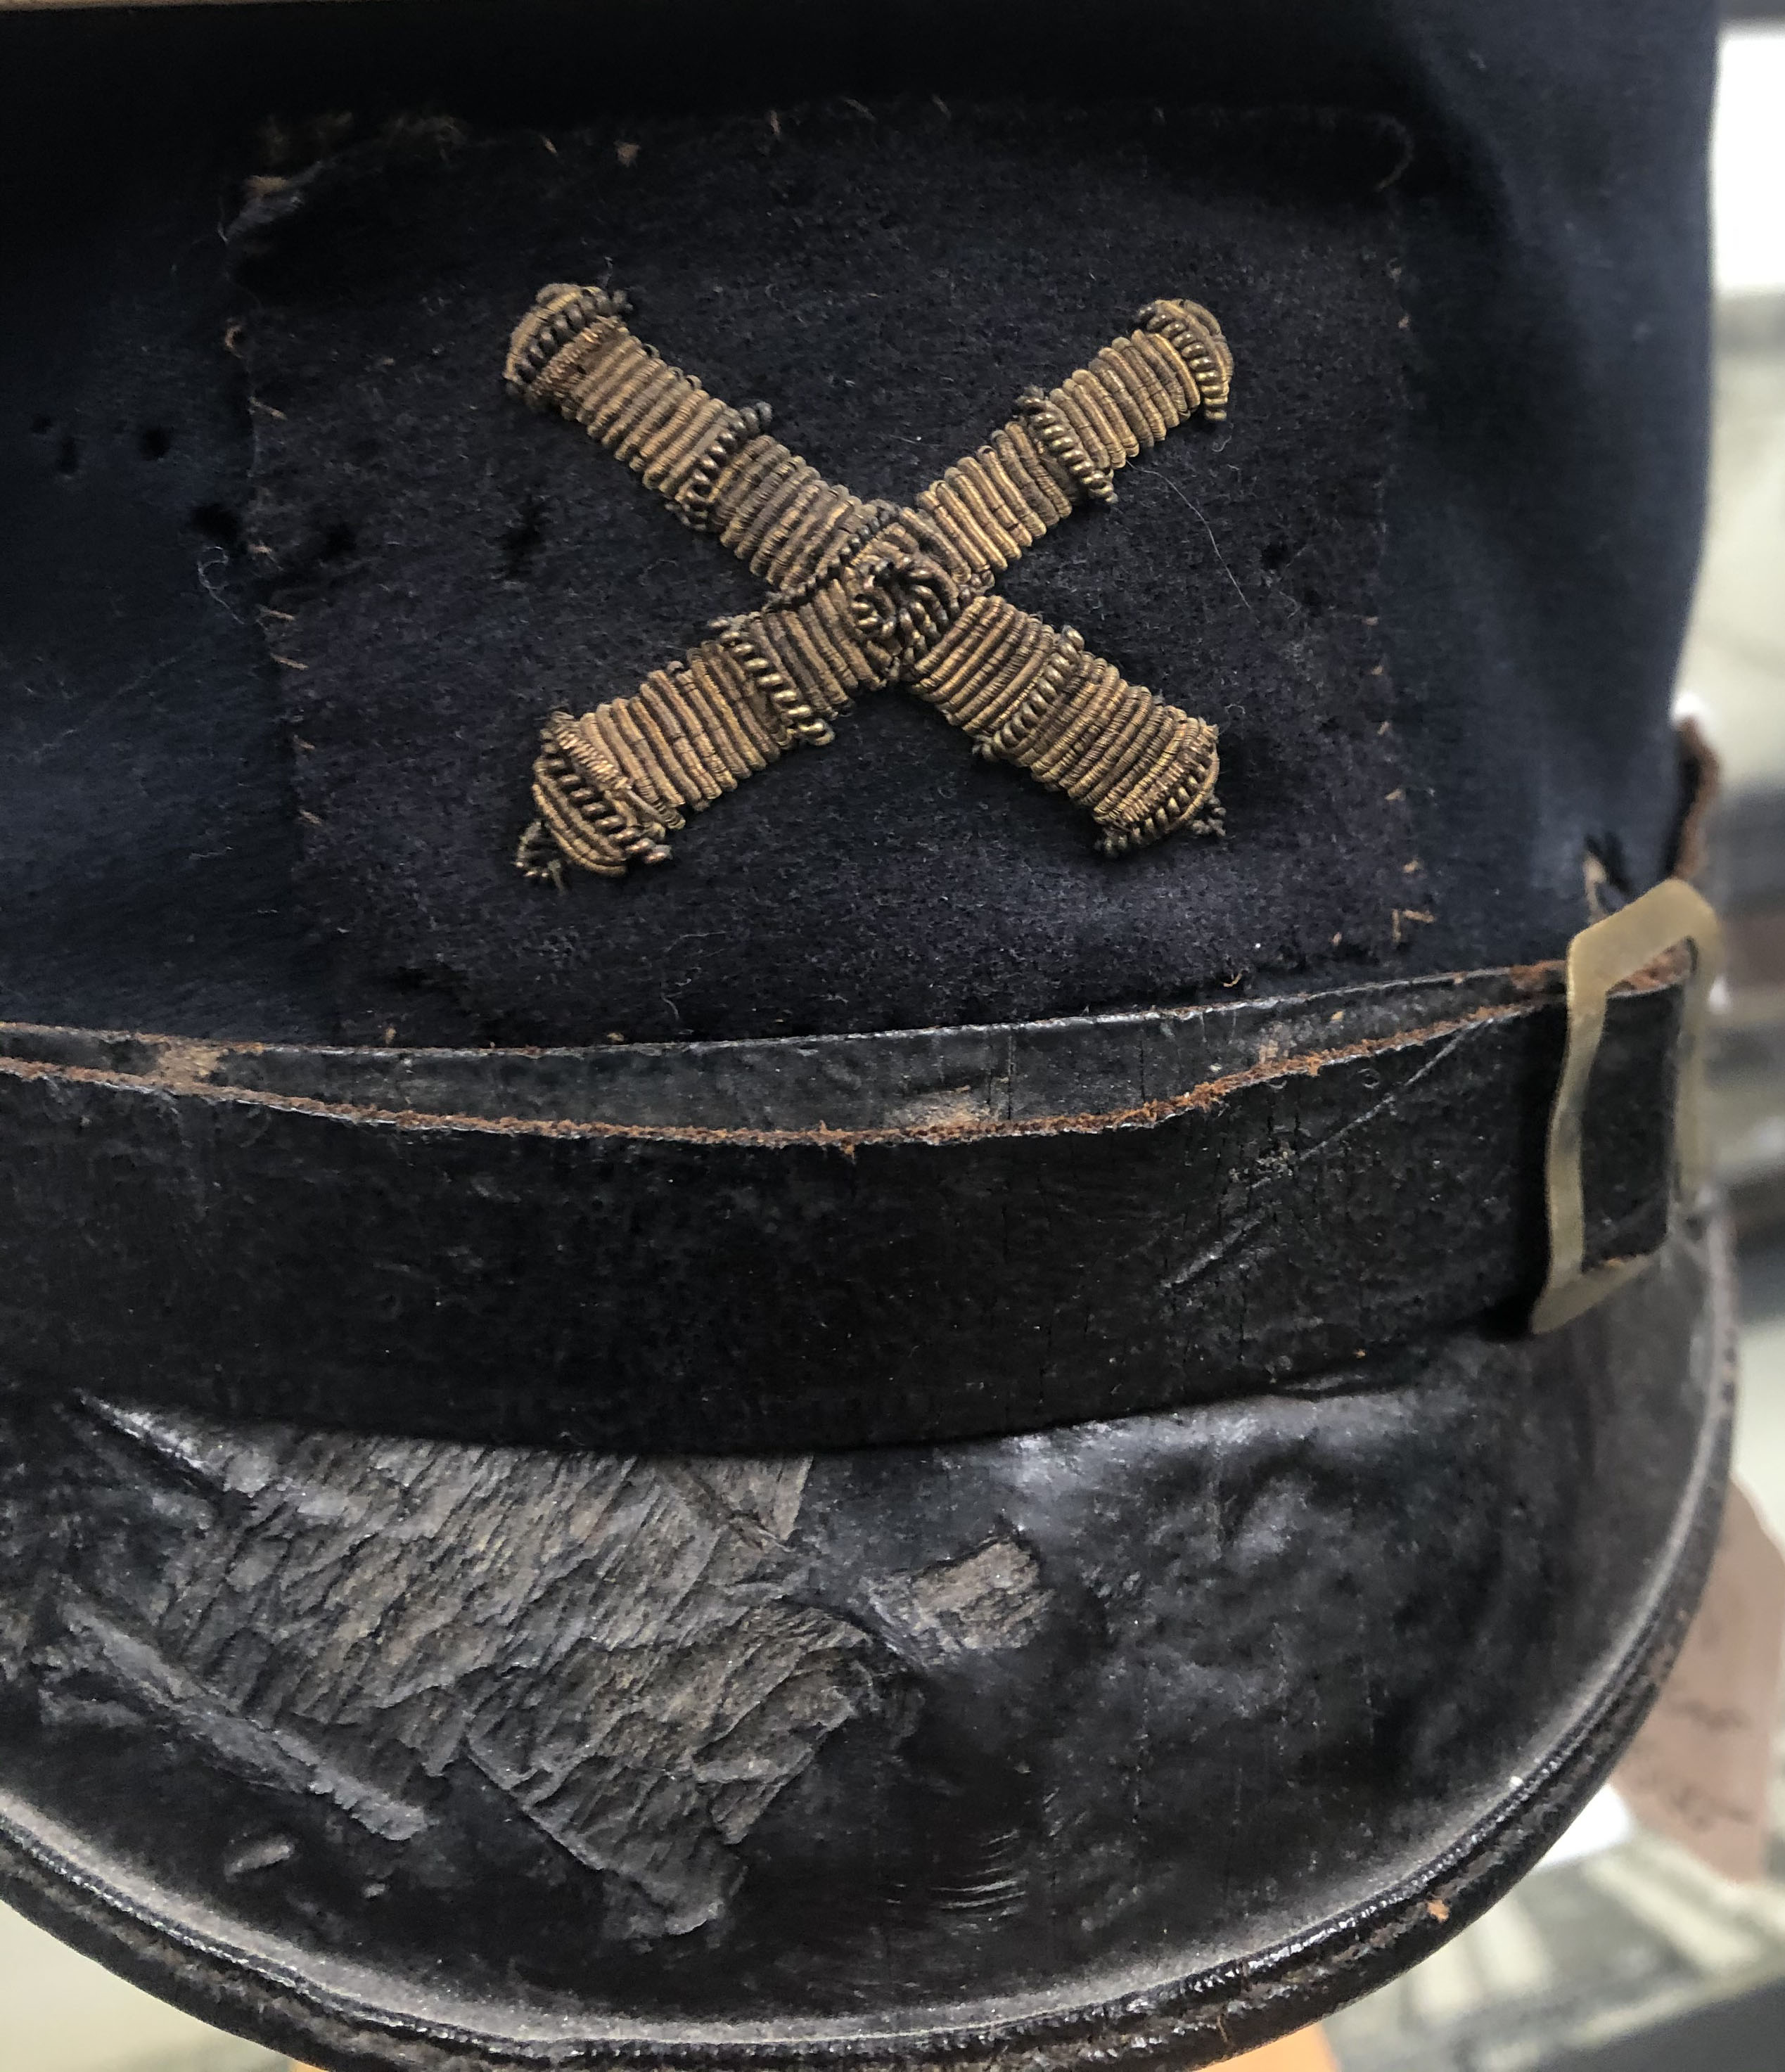 The original cap with insignia in place.